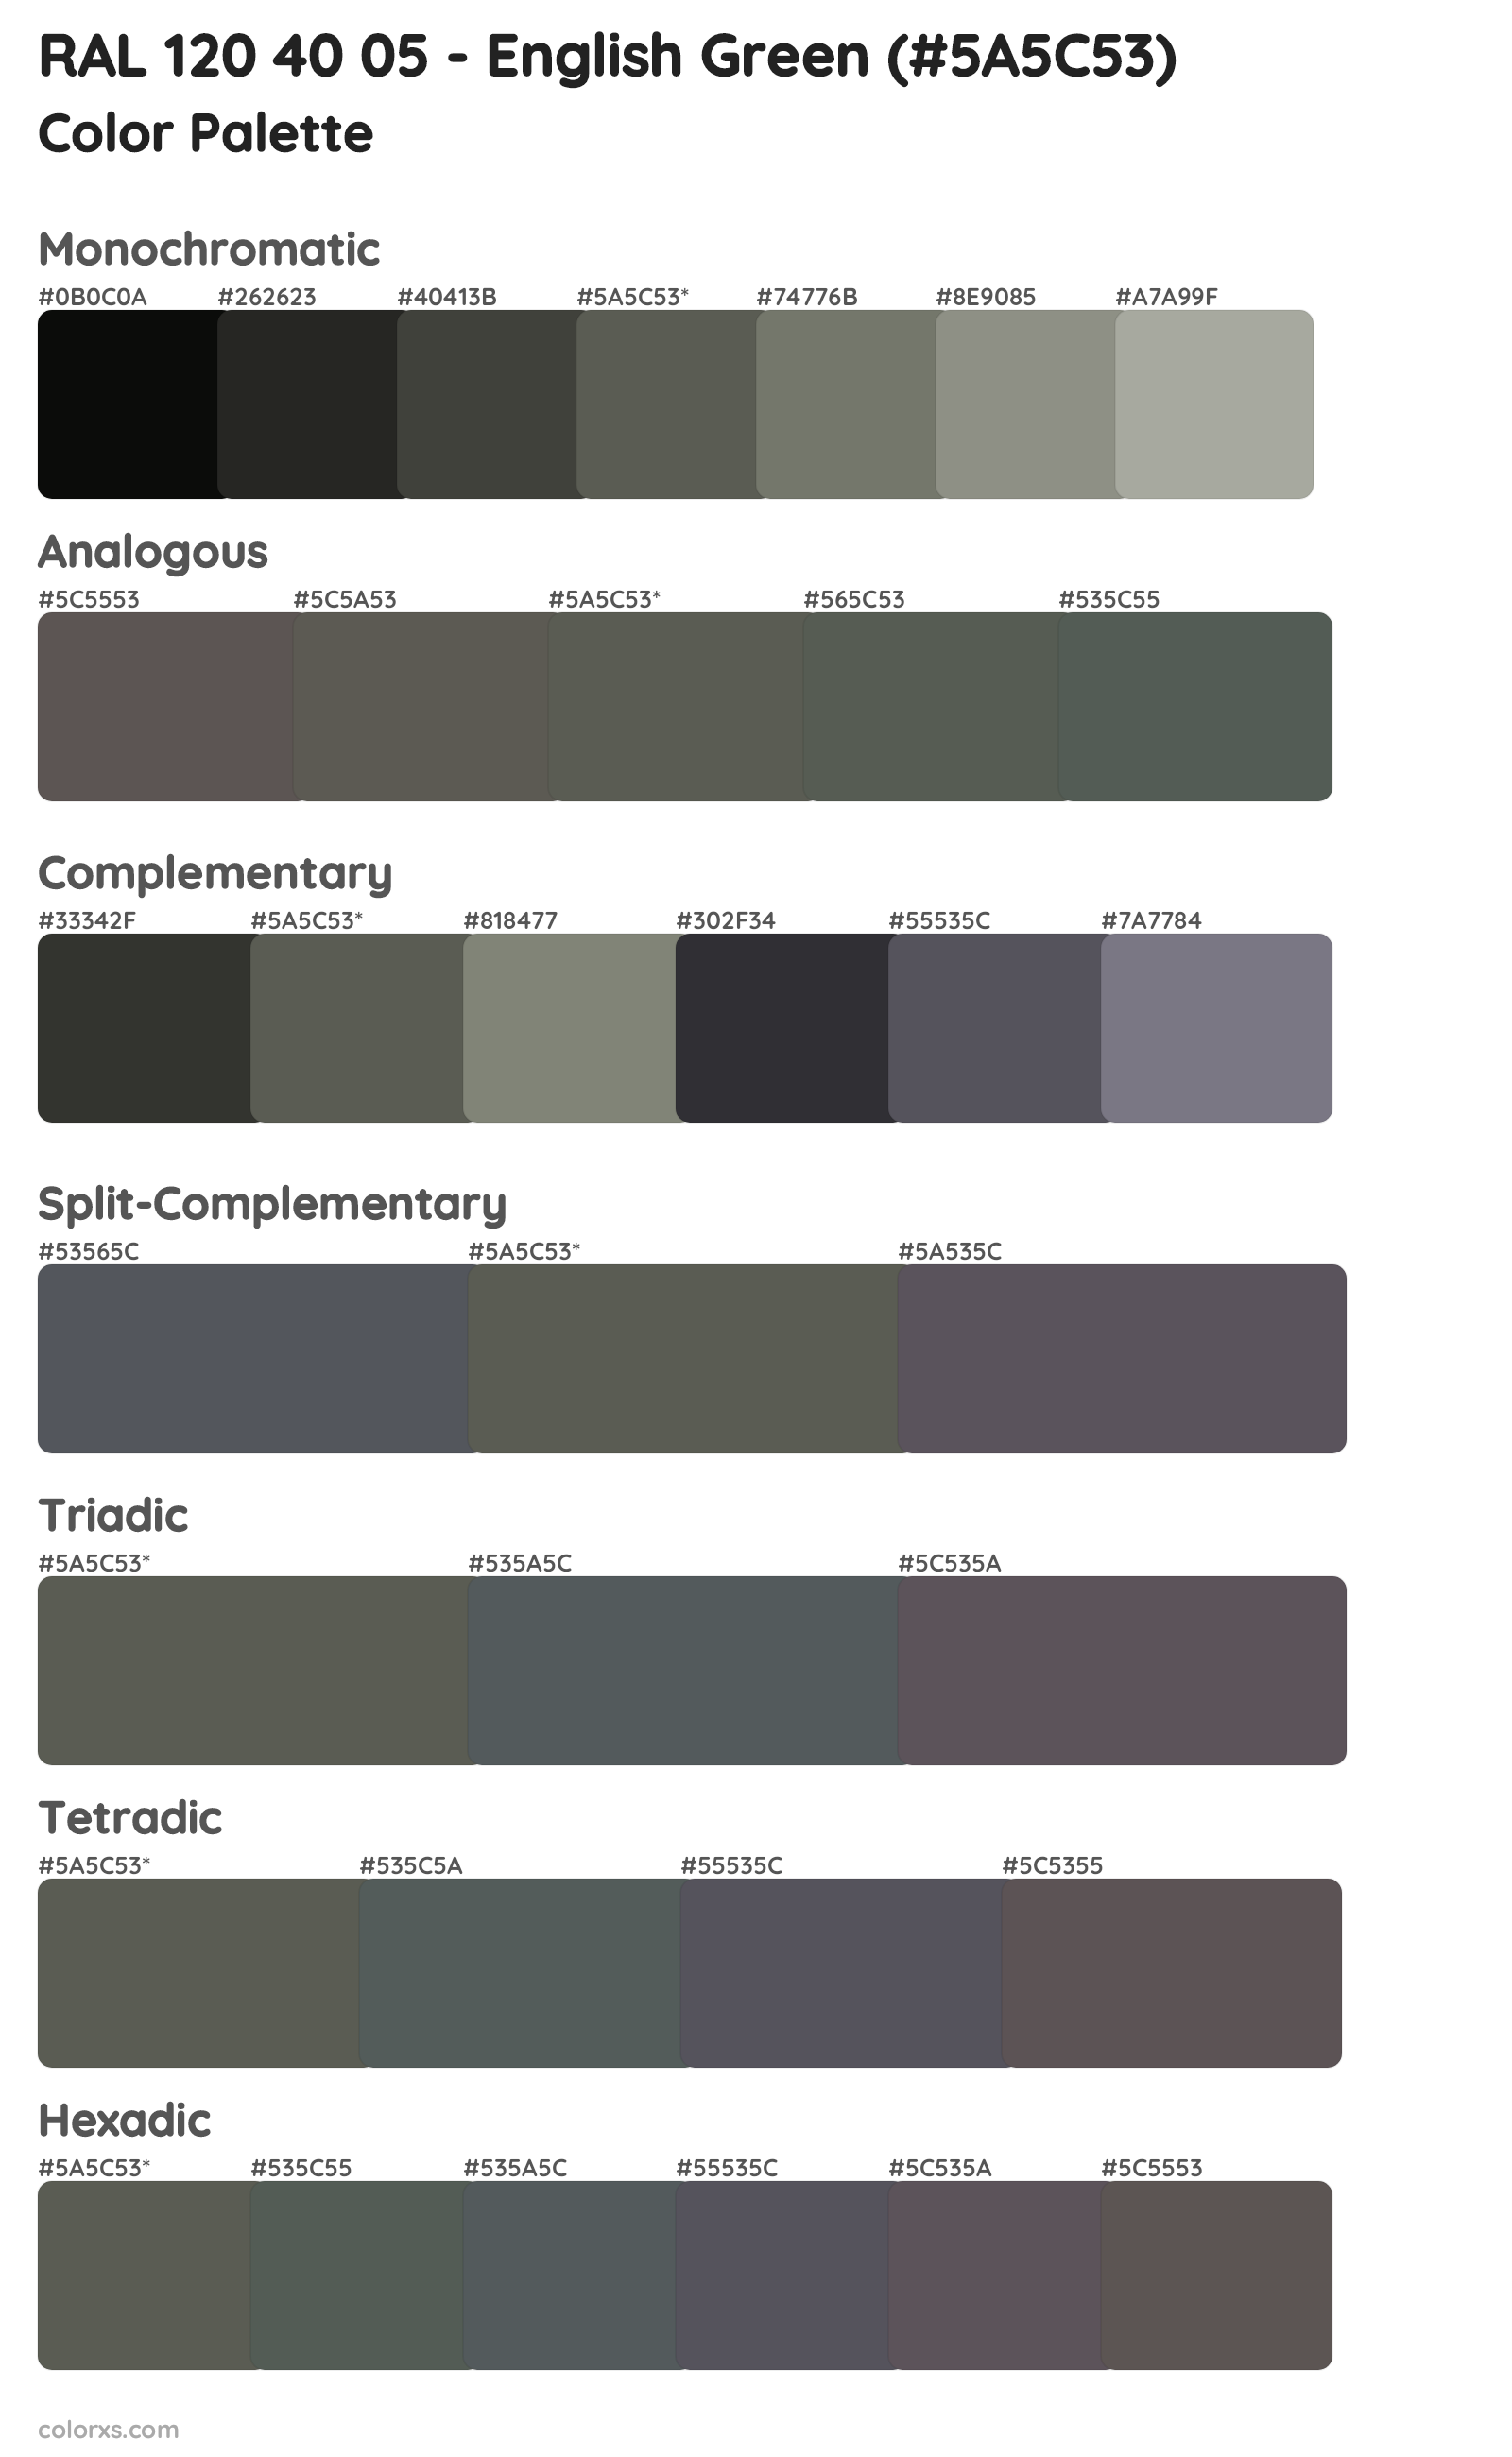 RAL 120 40 05 - English Green Color Scheme Palettes